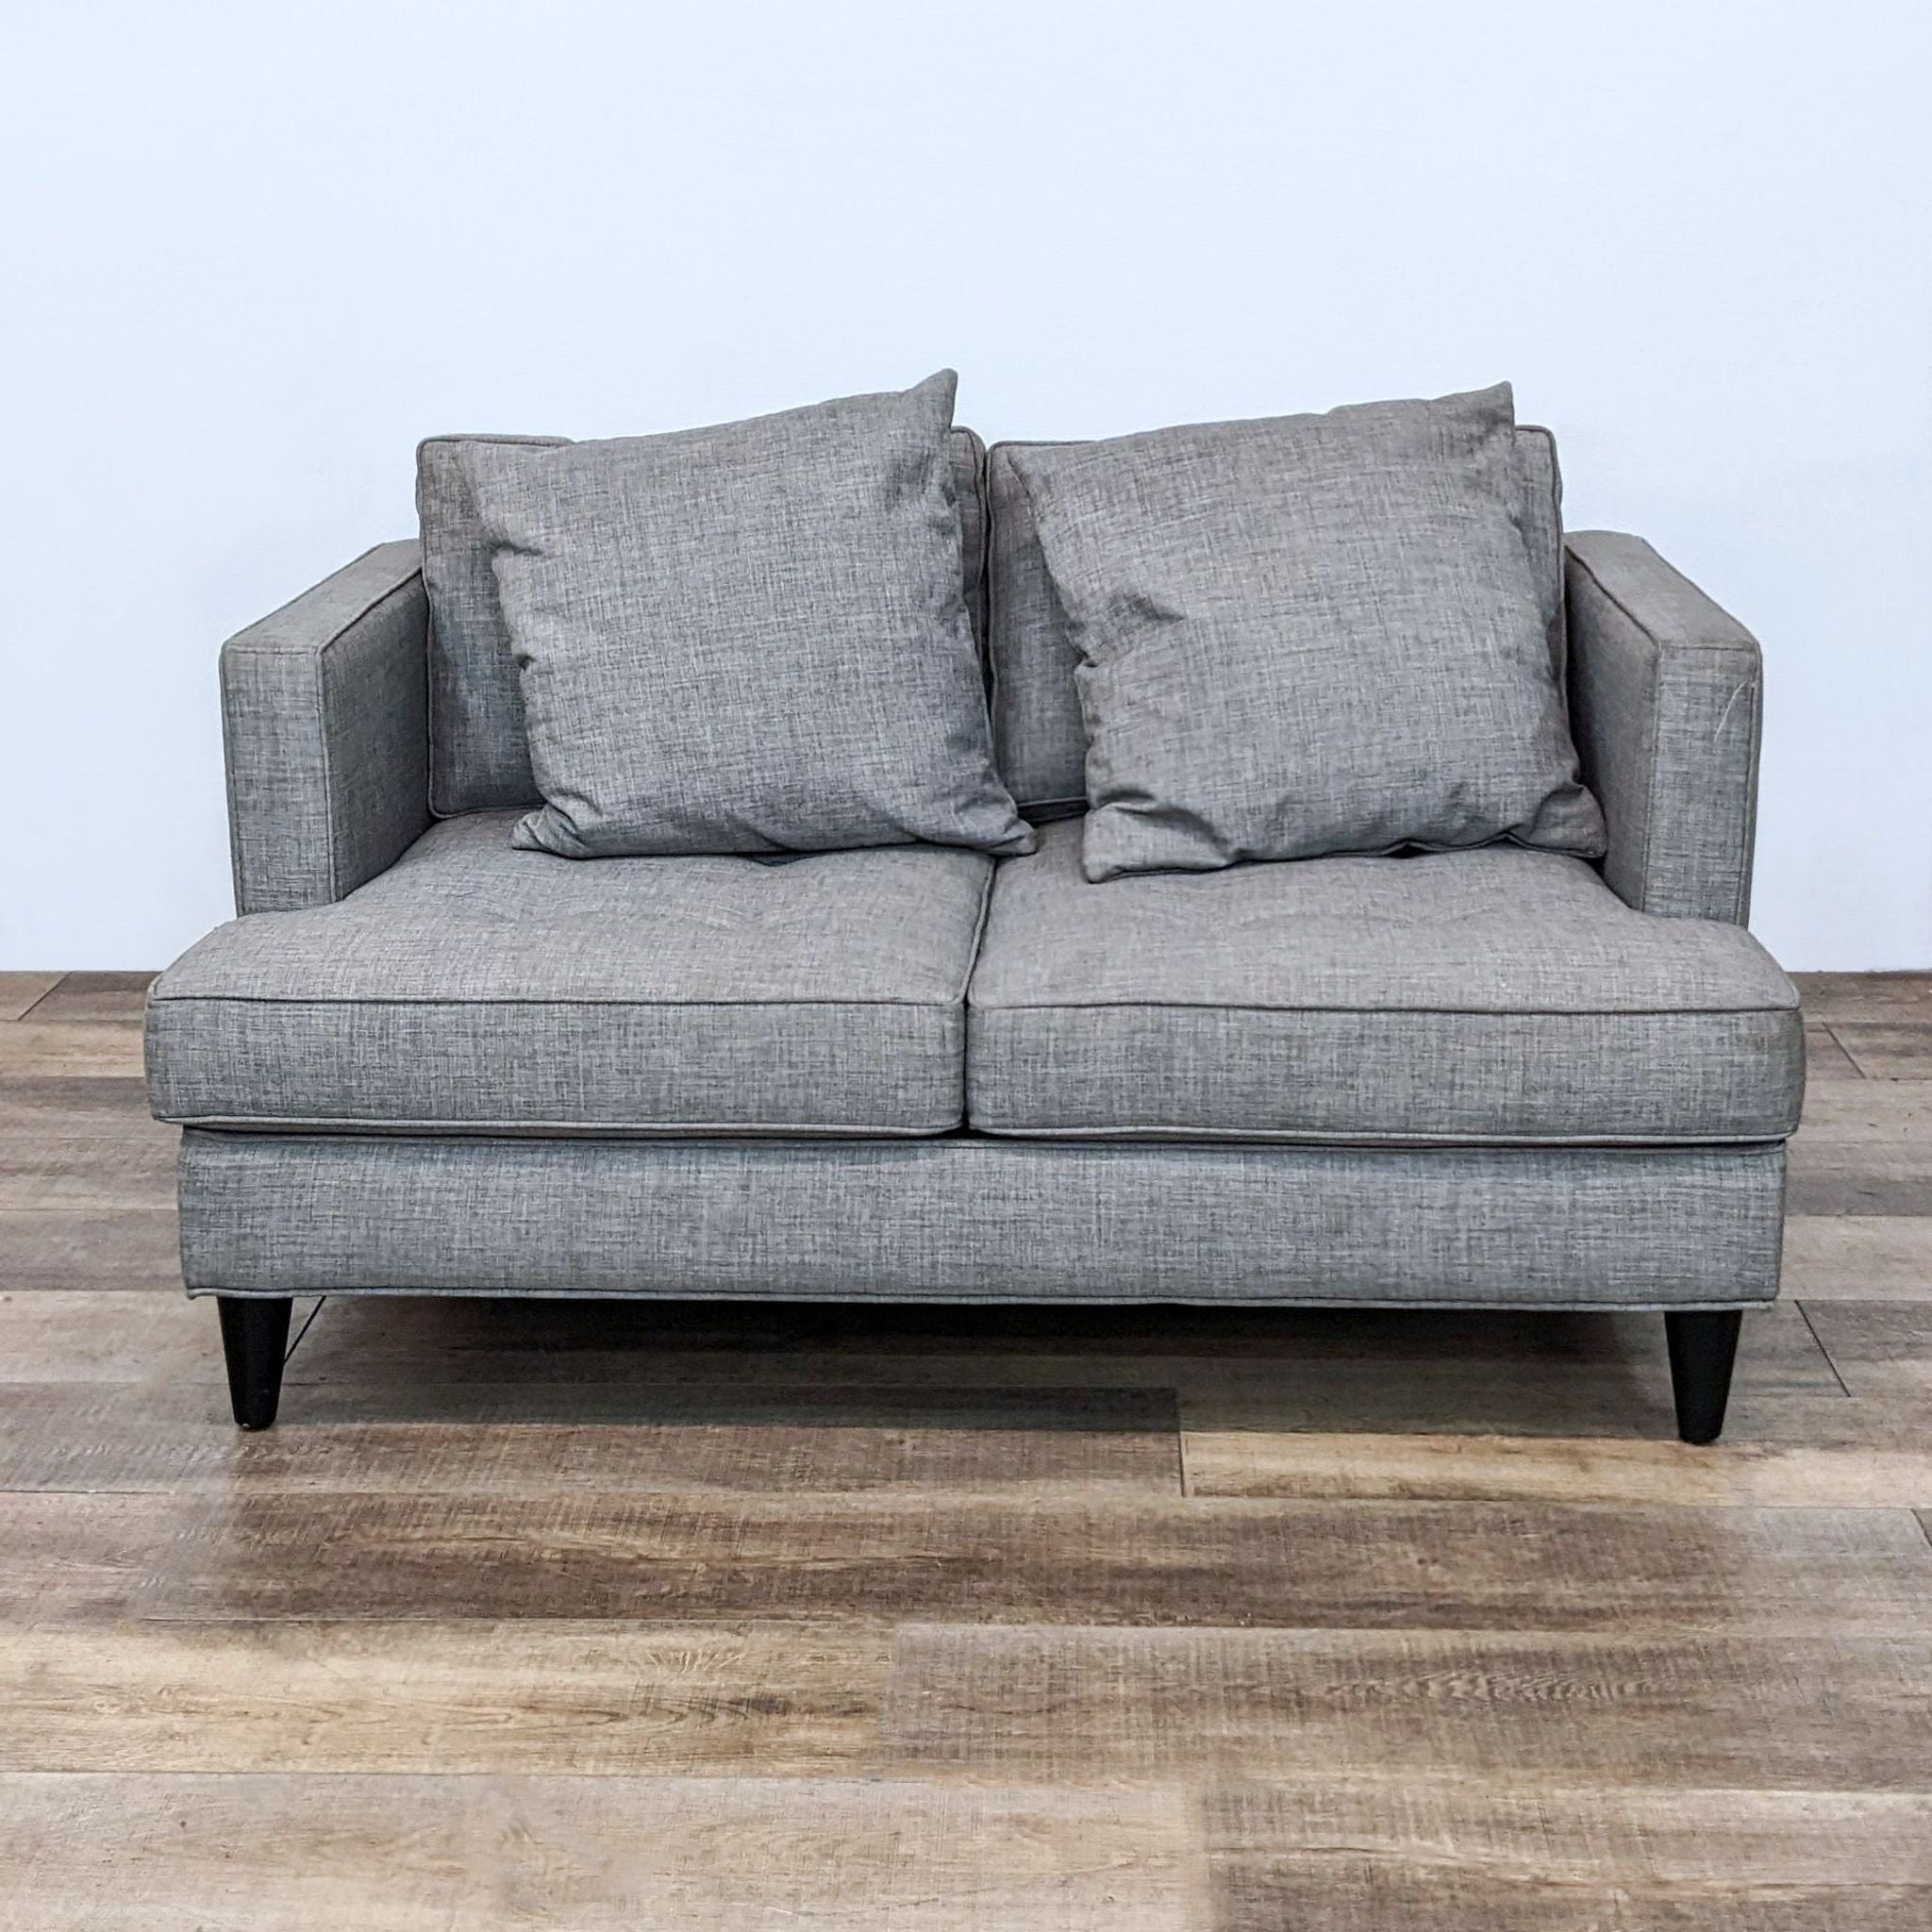 Reperch tufted loveseat with grey upholstery and dark wooden feet, featuring two cushions.